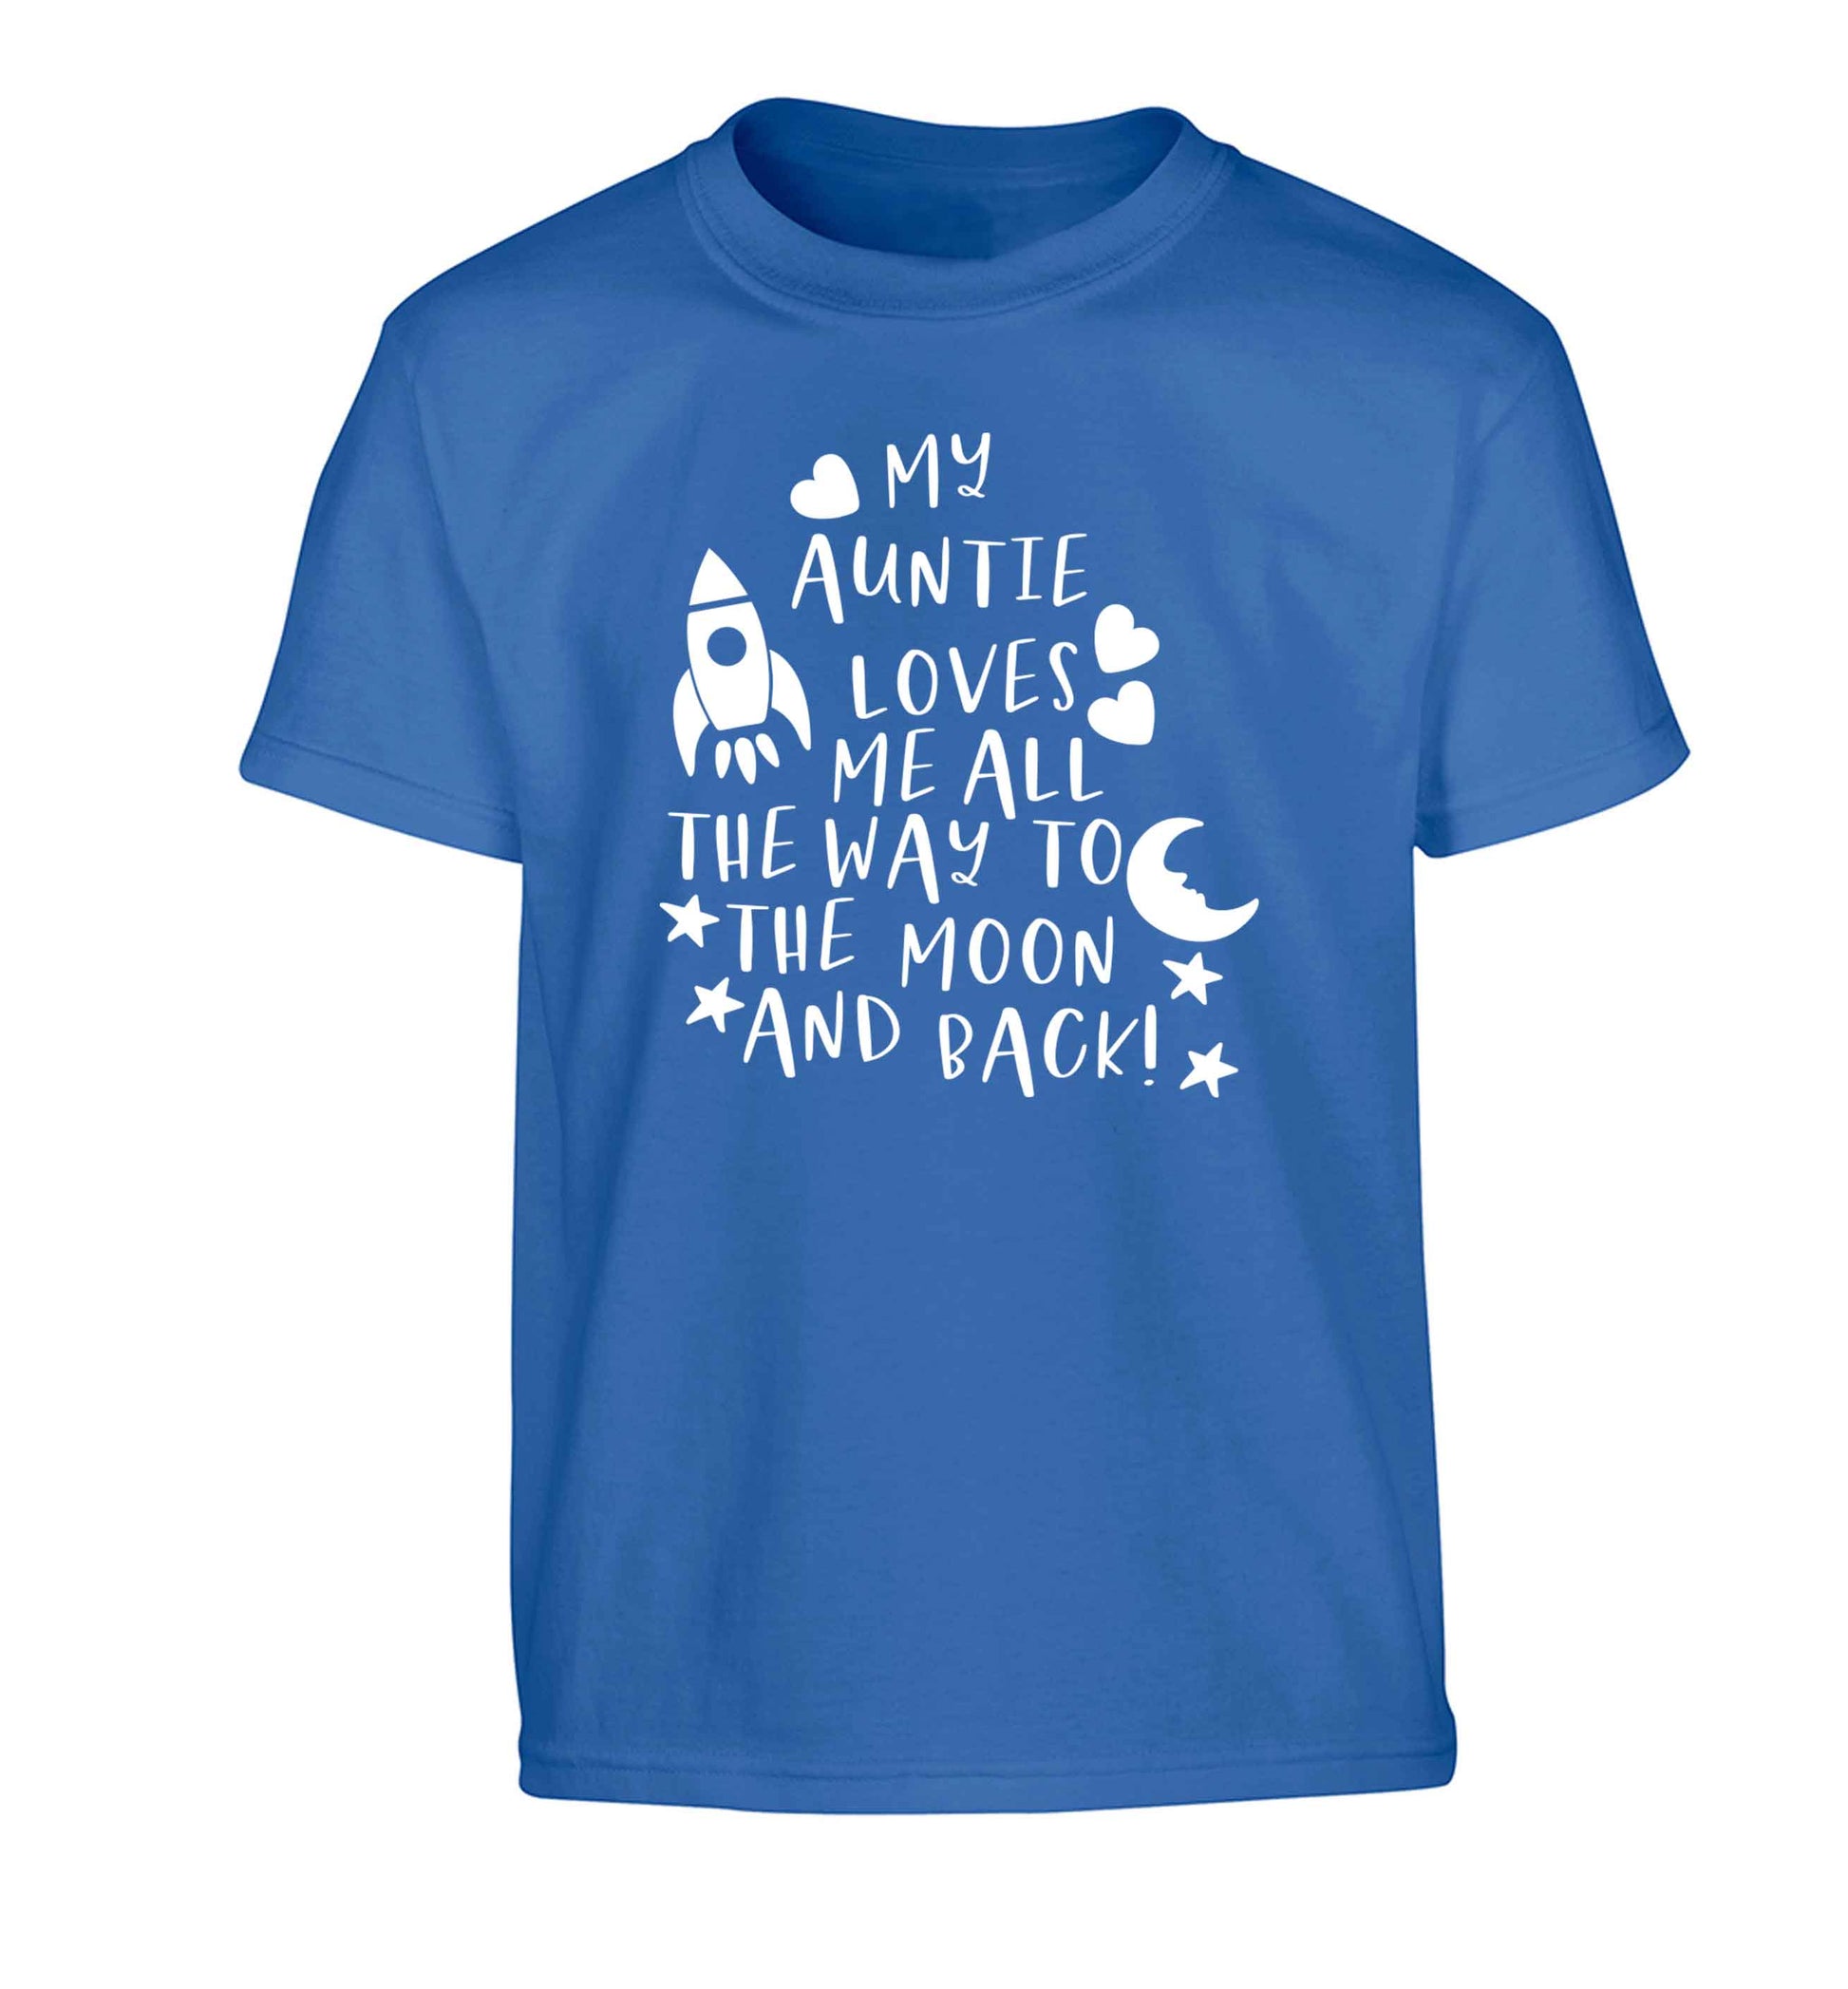 My auntie loves me all the way to the moon and back Children's blue Tshirt 12-13 Years